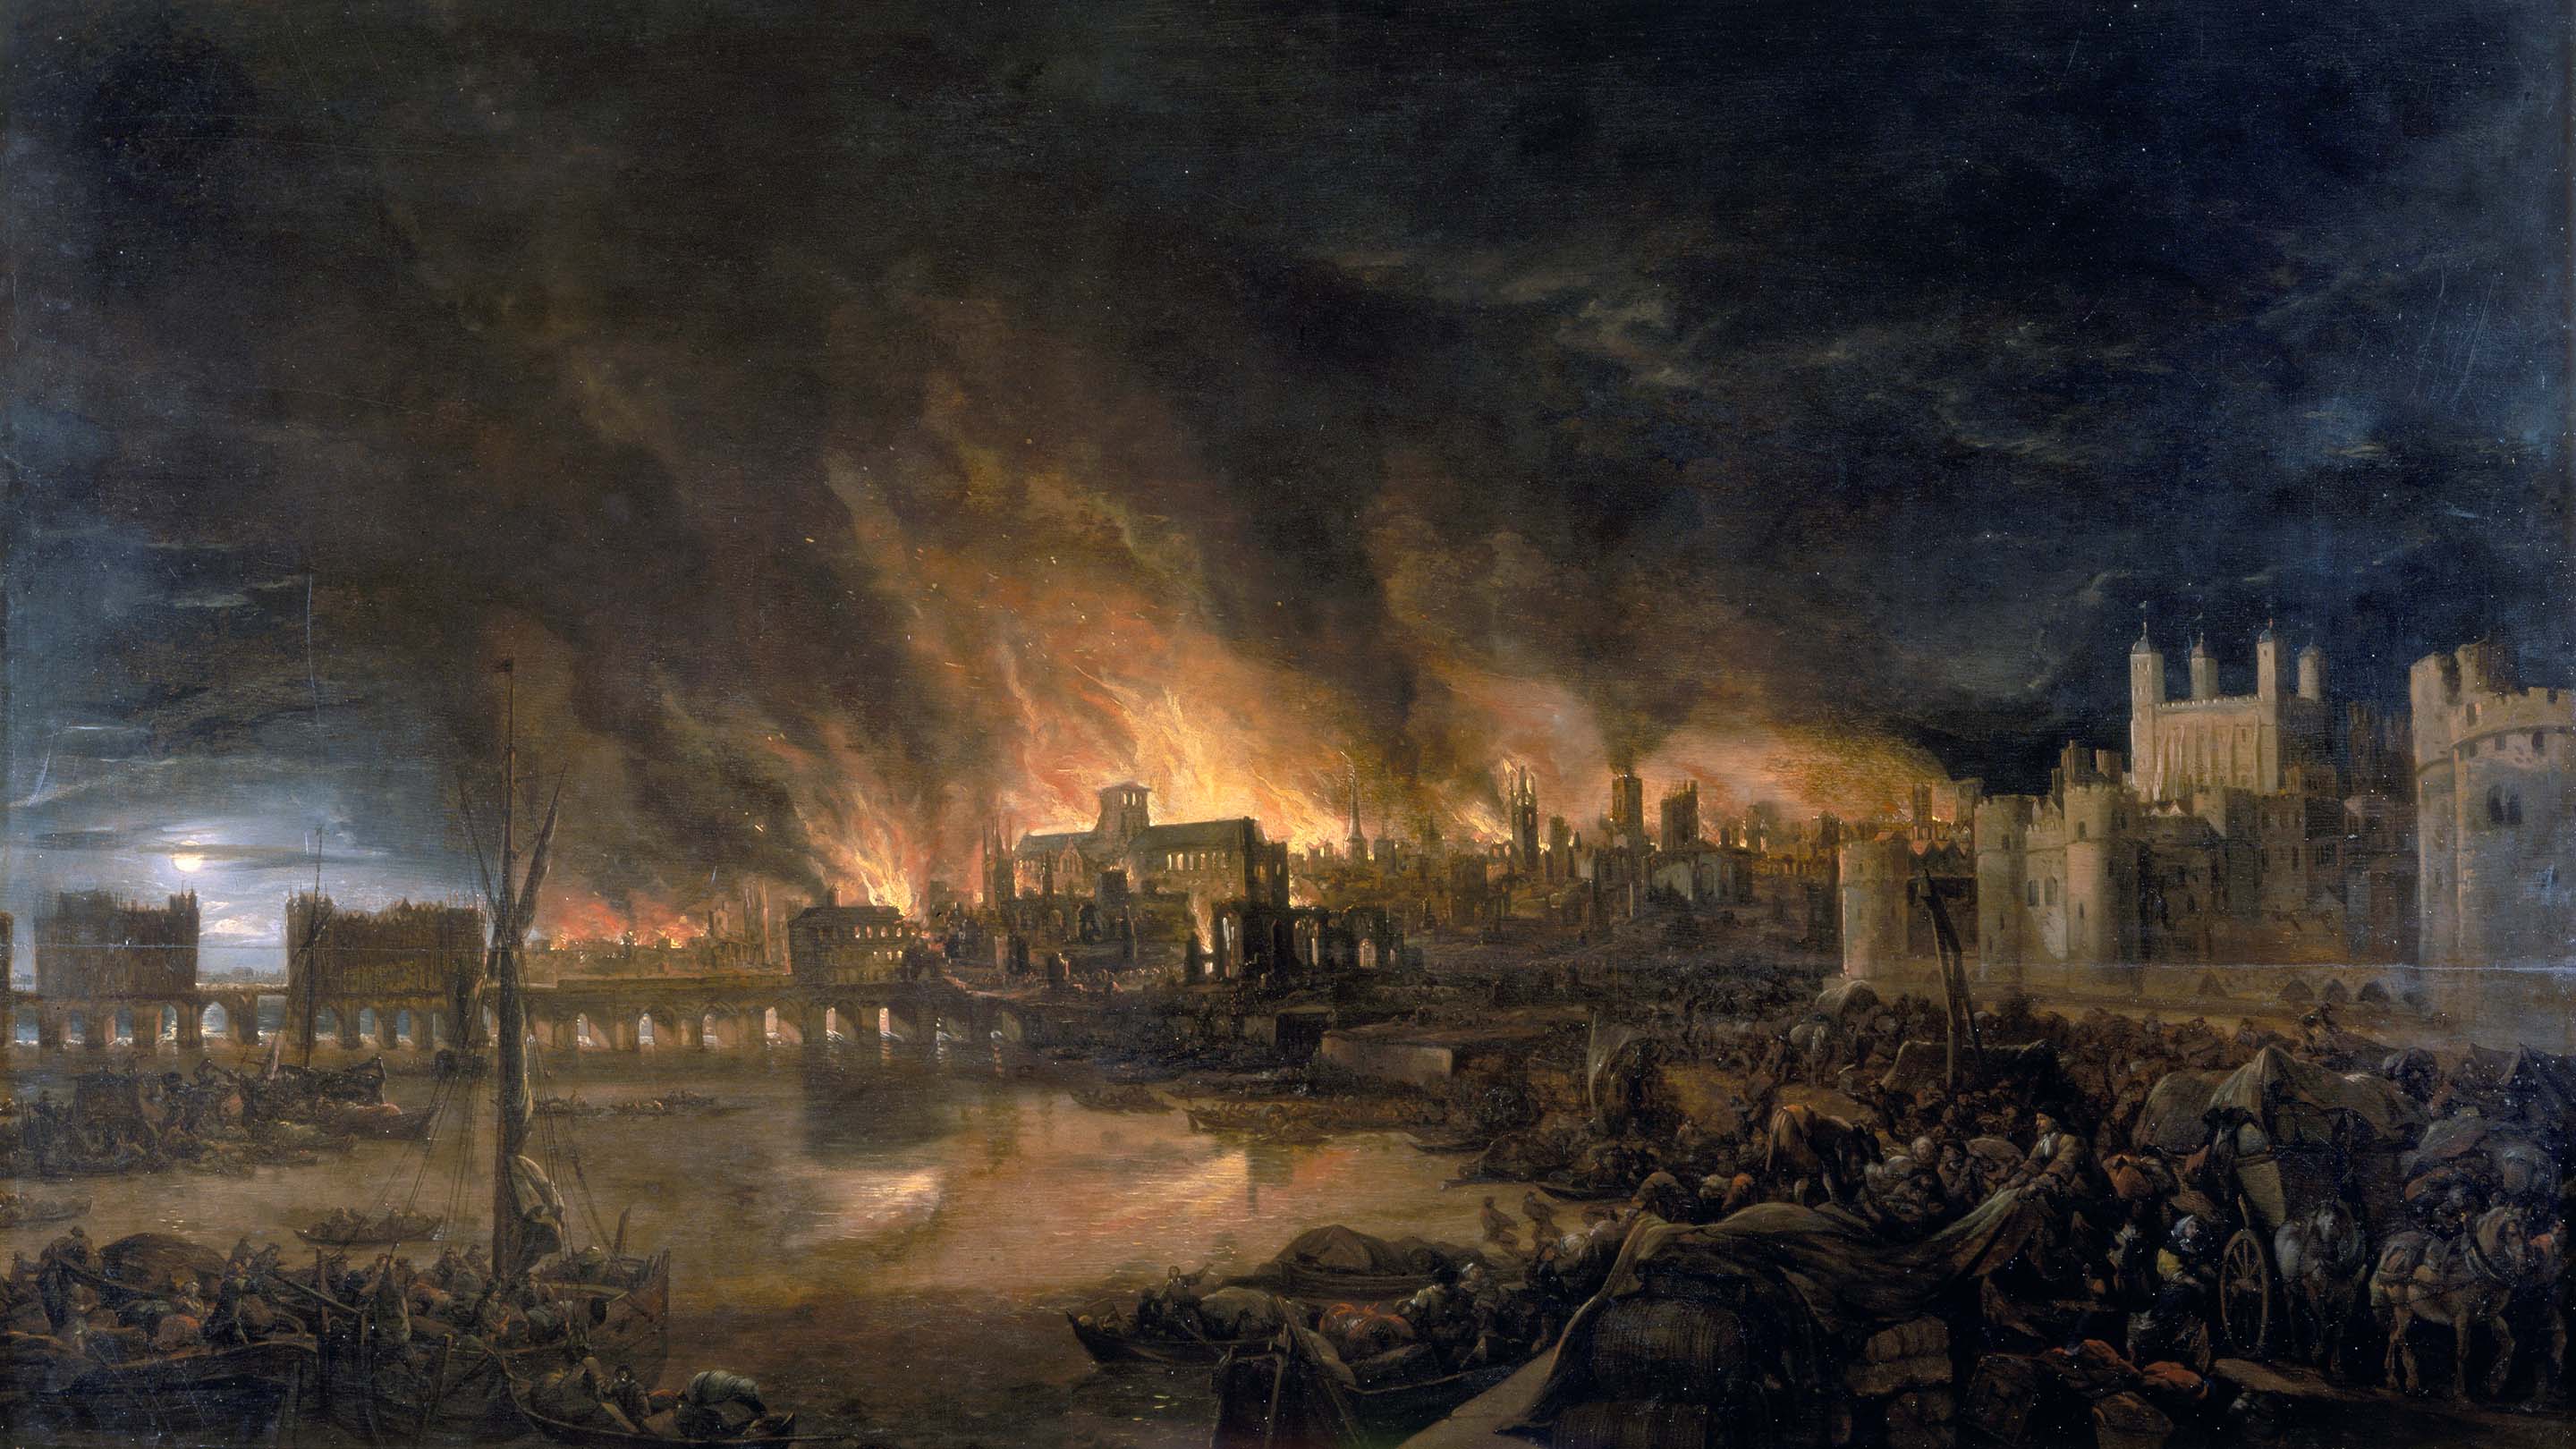 This painting shows the great fire of London as seen from a boat in vicinity of Tower Wharf. The painting depicts Old London Bridge, various houses, a drawbridge and wooden parapet, the churches of St Dunstan-in-the-West and St Bride's, All Hallow's the Great, Old St Paul's, St Magnus the Martyr, St Lawrence Pountney, St Mary-le-Bow, St Dunstan-in-the East and Tower of London